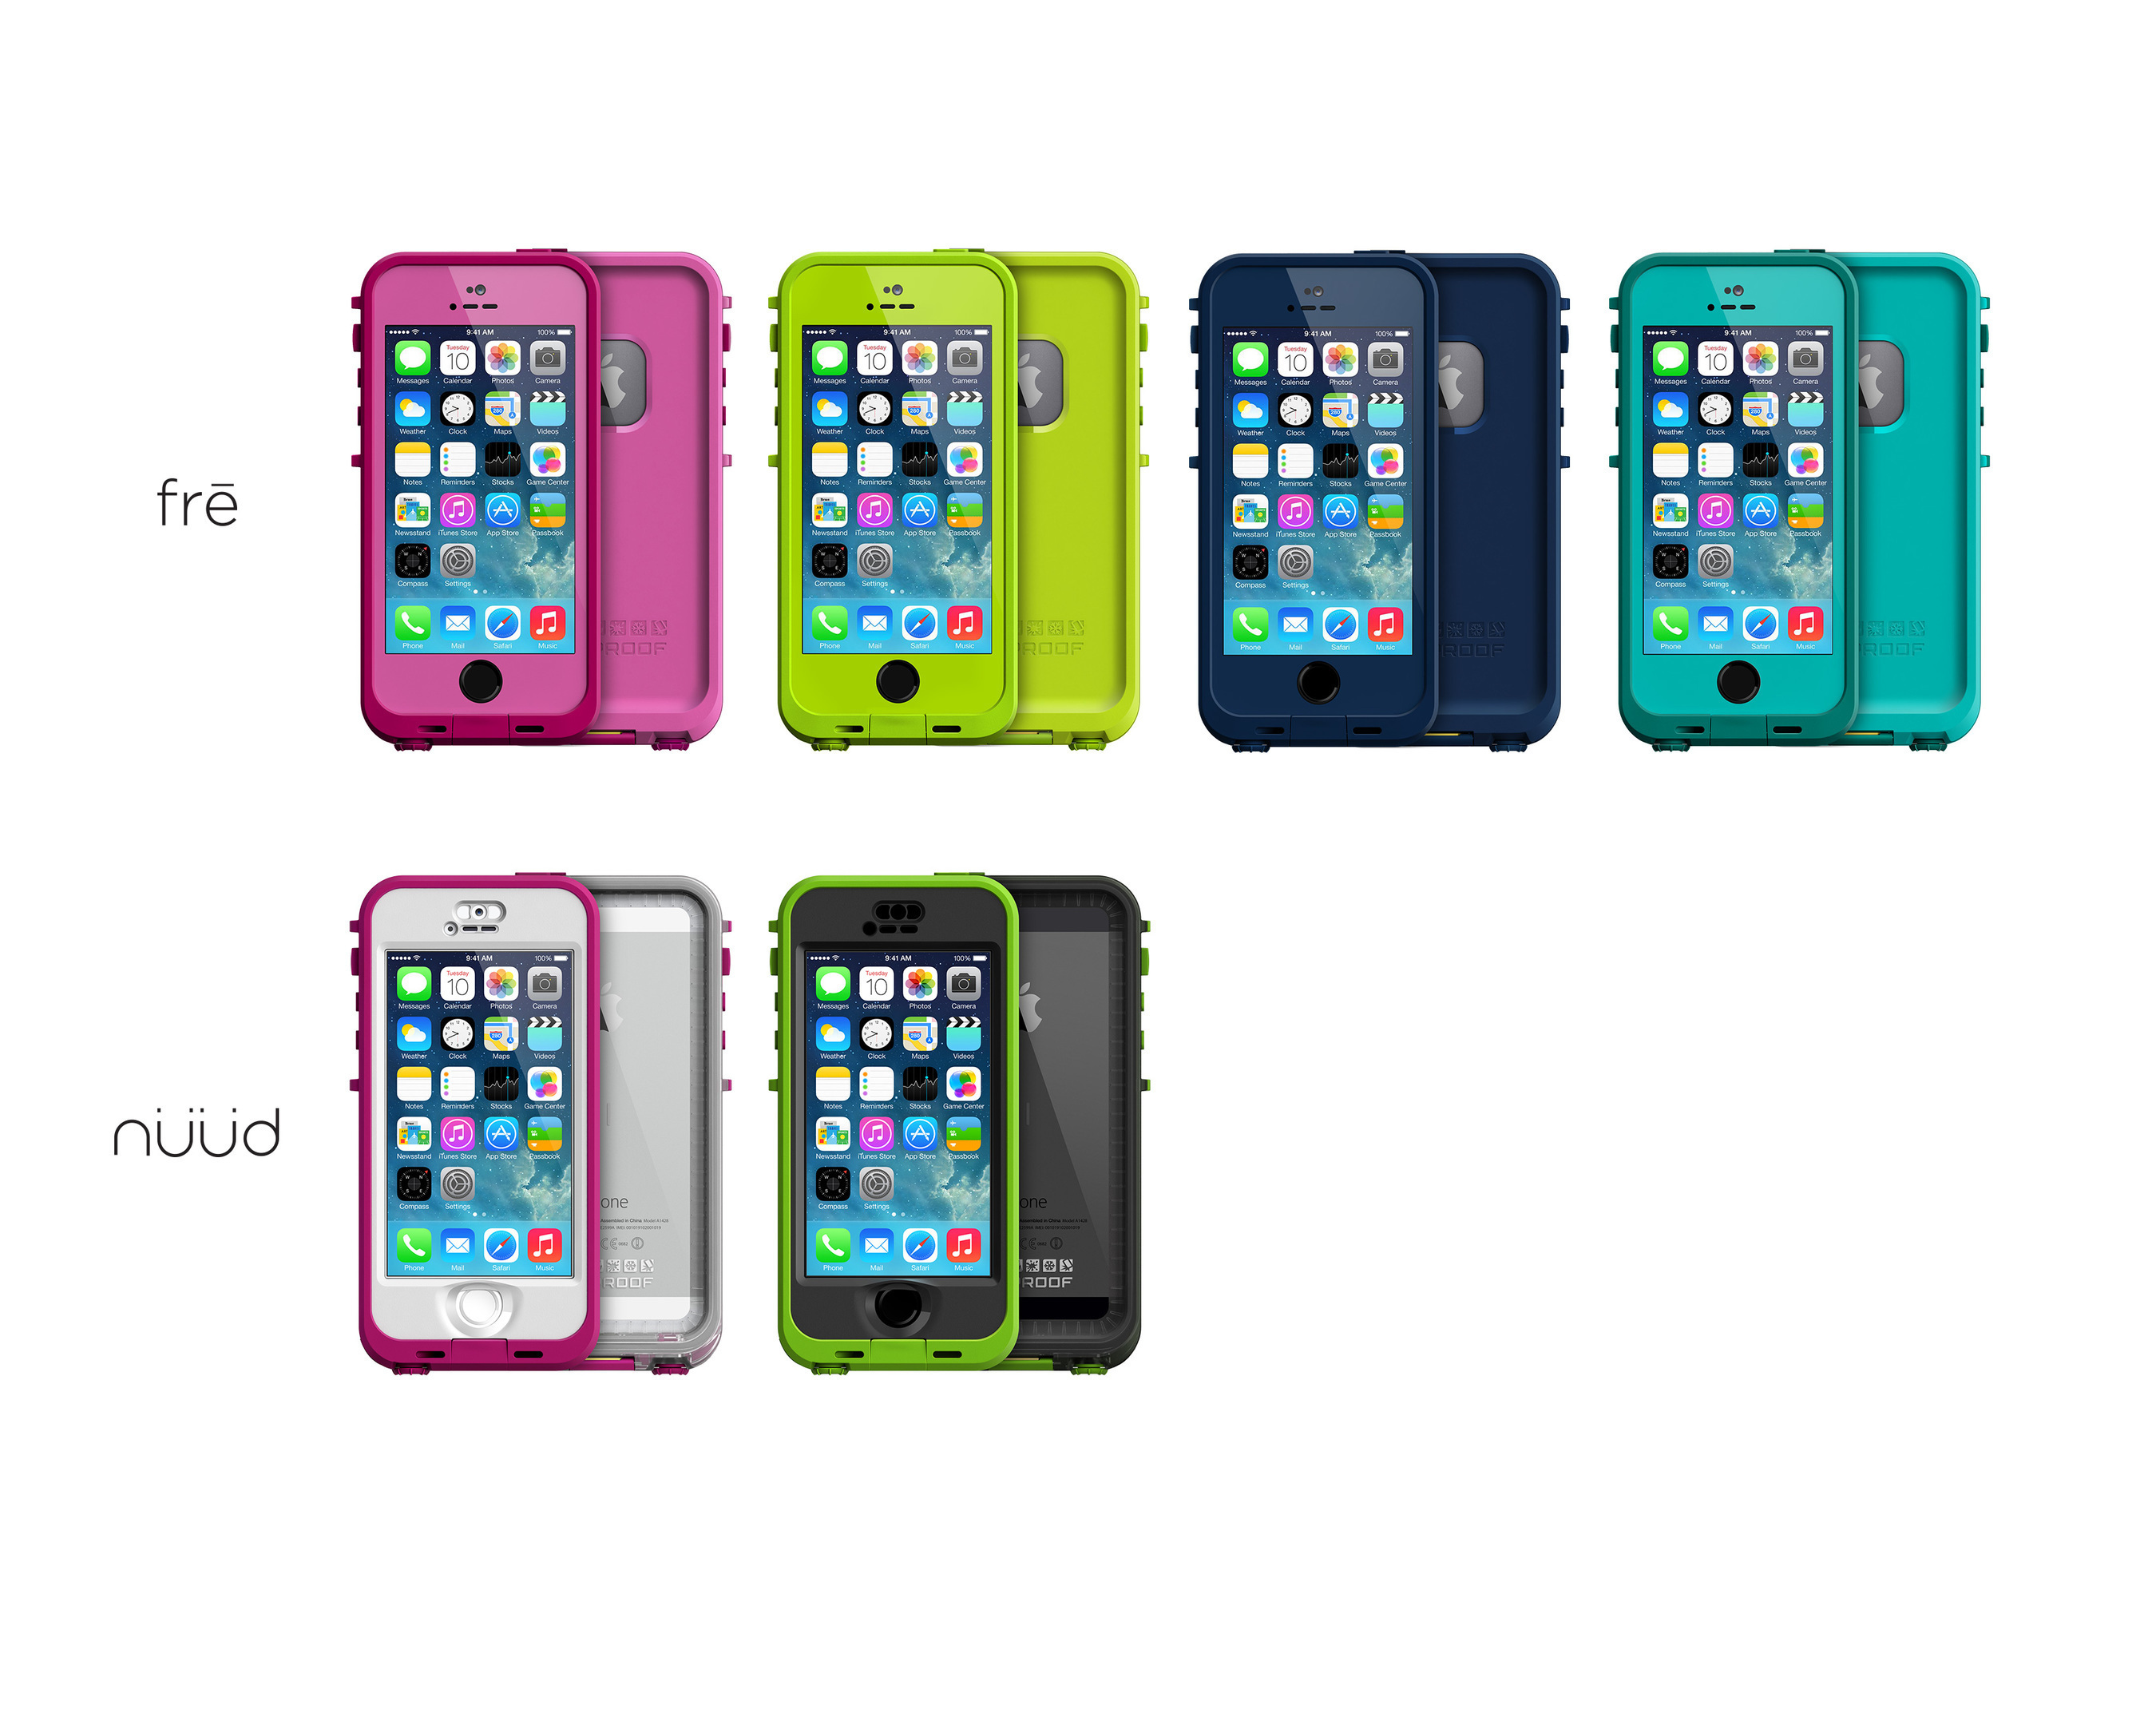 LifeProof fre and nuud are available in a variety of vibrant new summer colors. (PRNewsFoto/LifeProof)